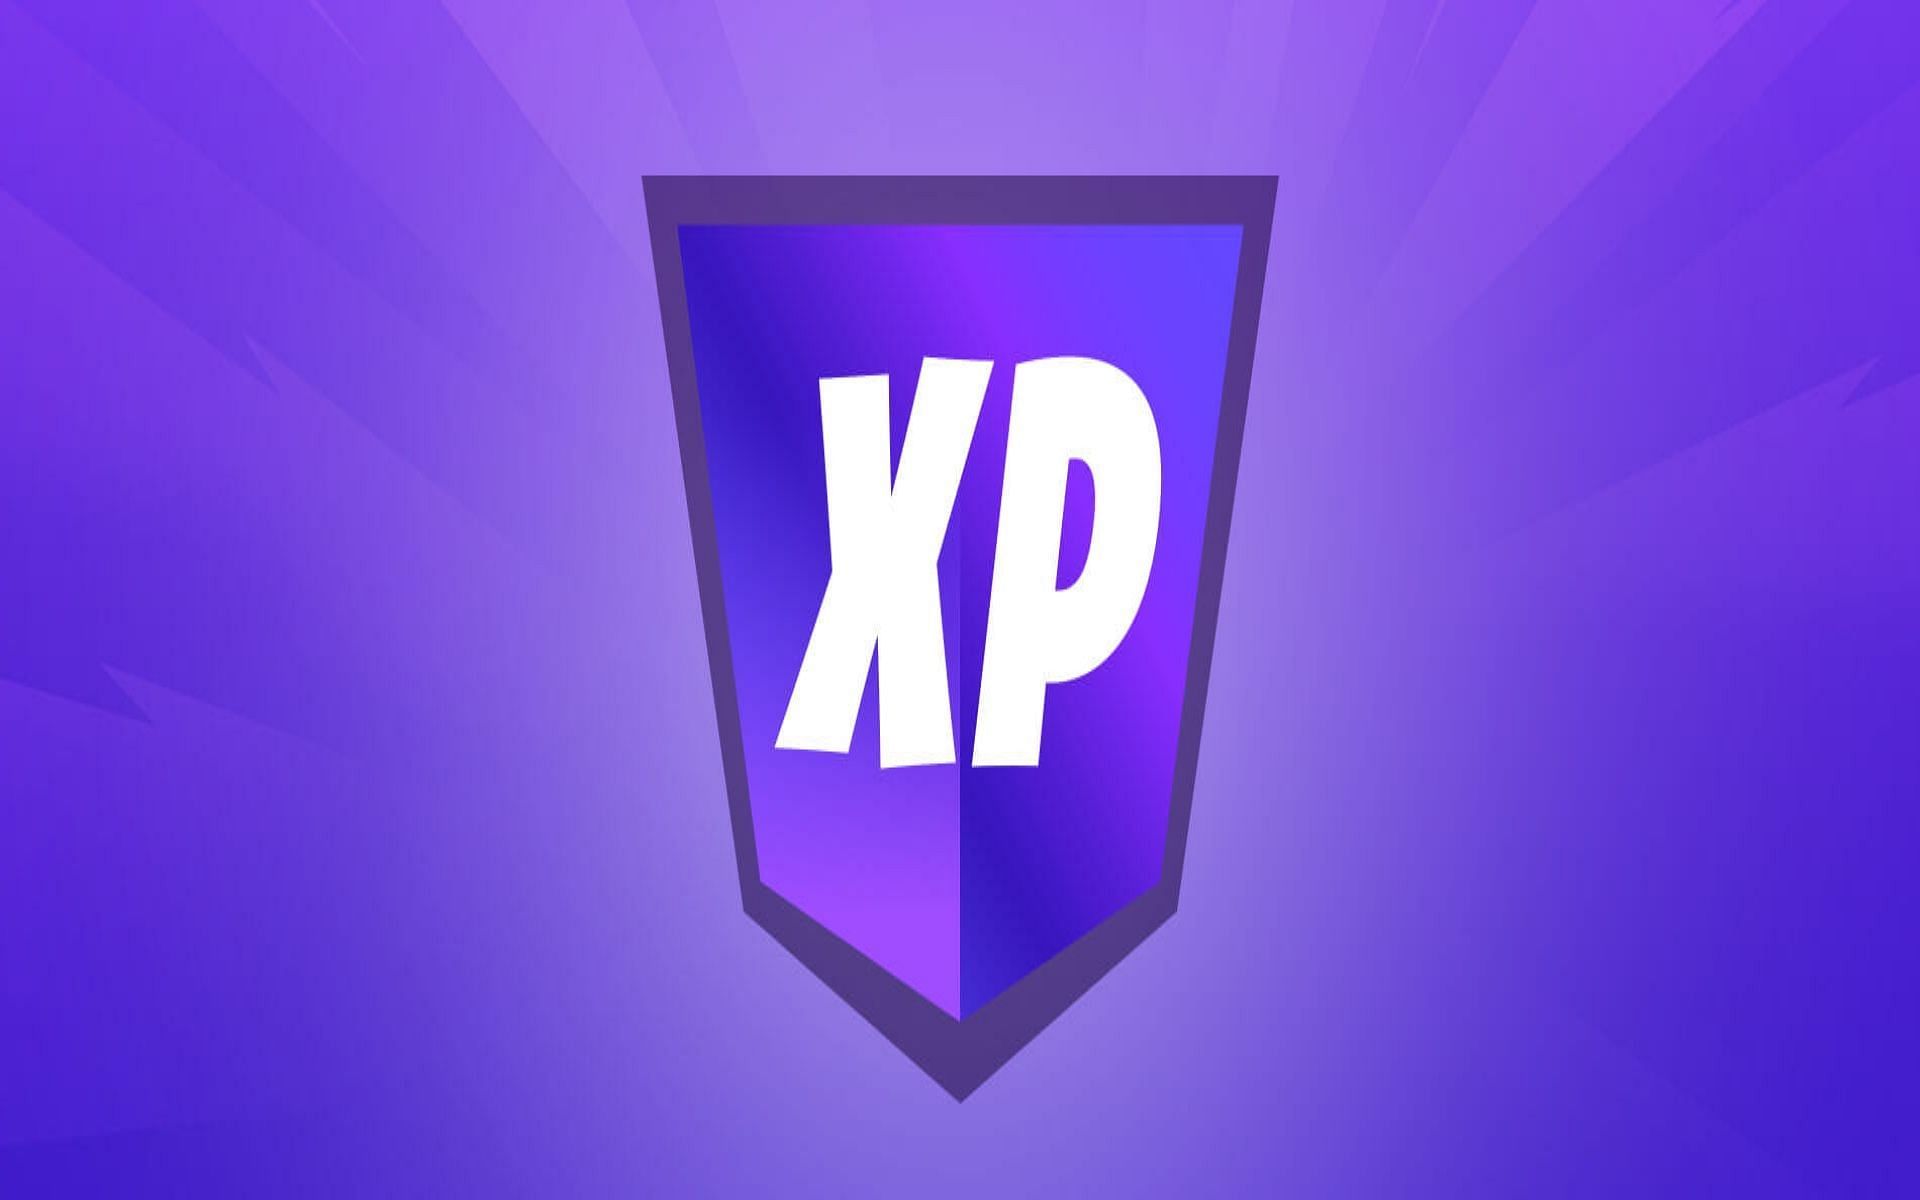 Ways to earn XP in Chapter 3 Season 1 (Image via Epic Games)